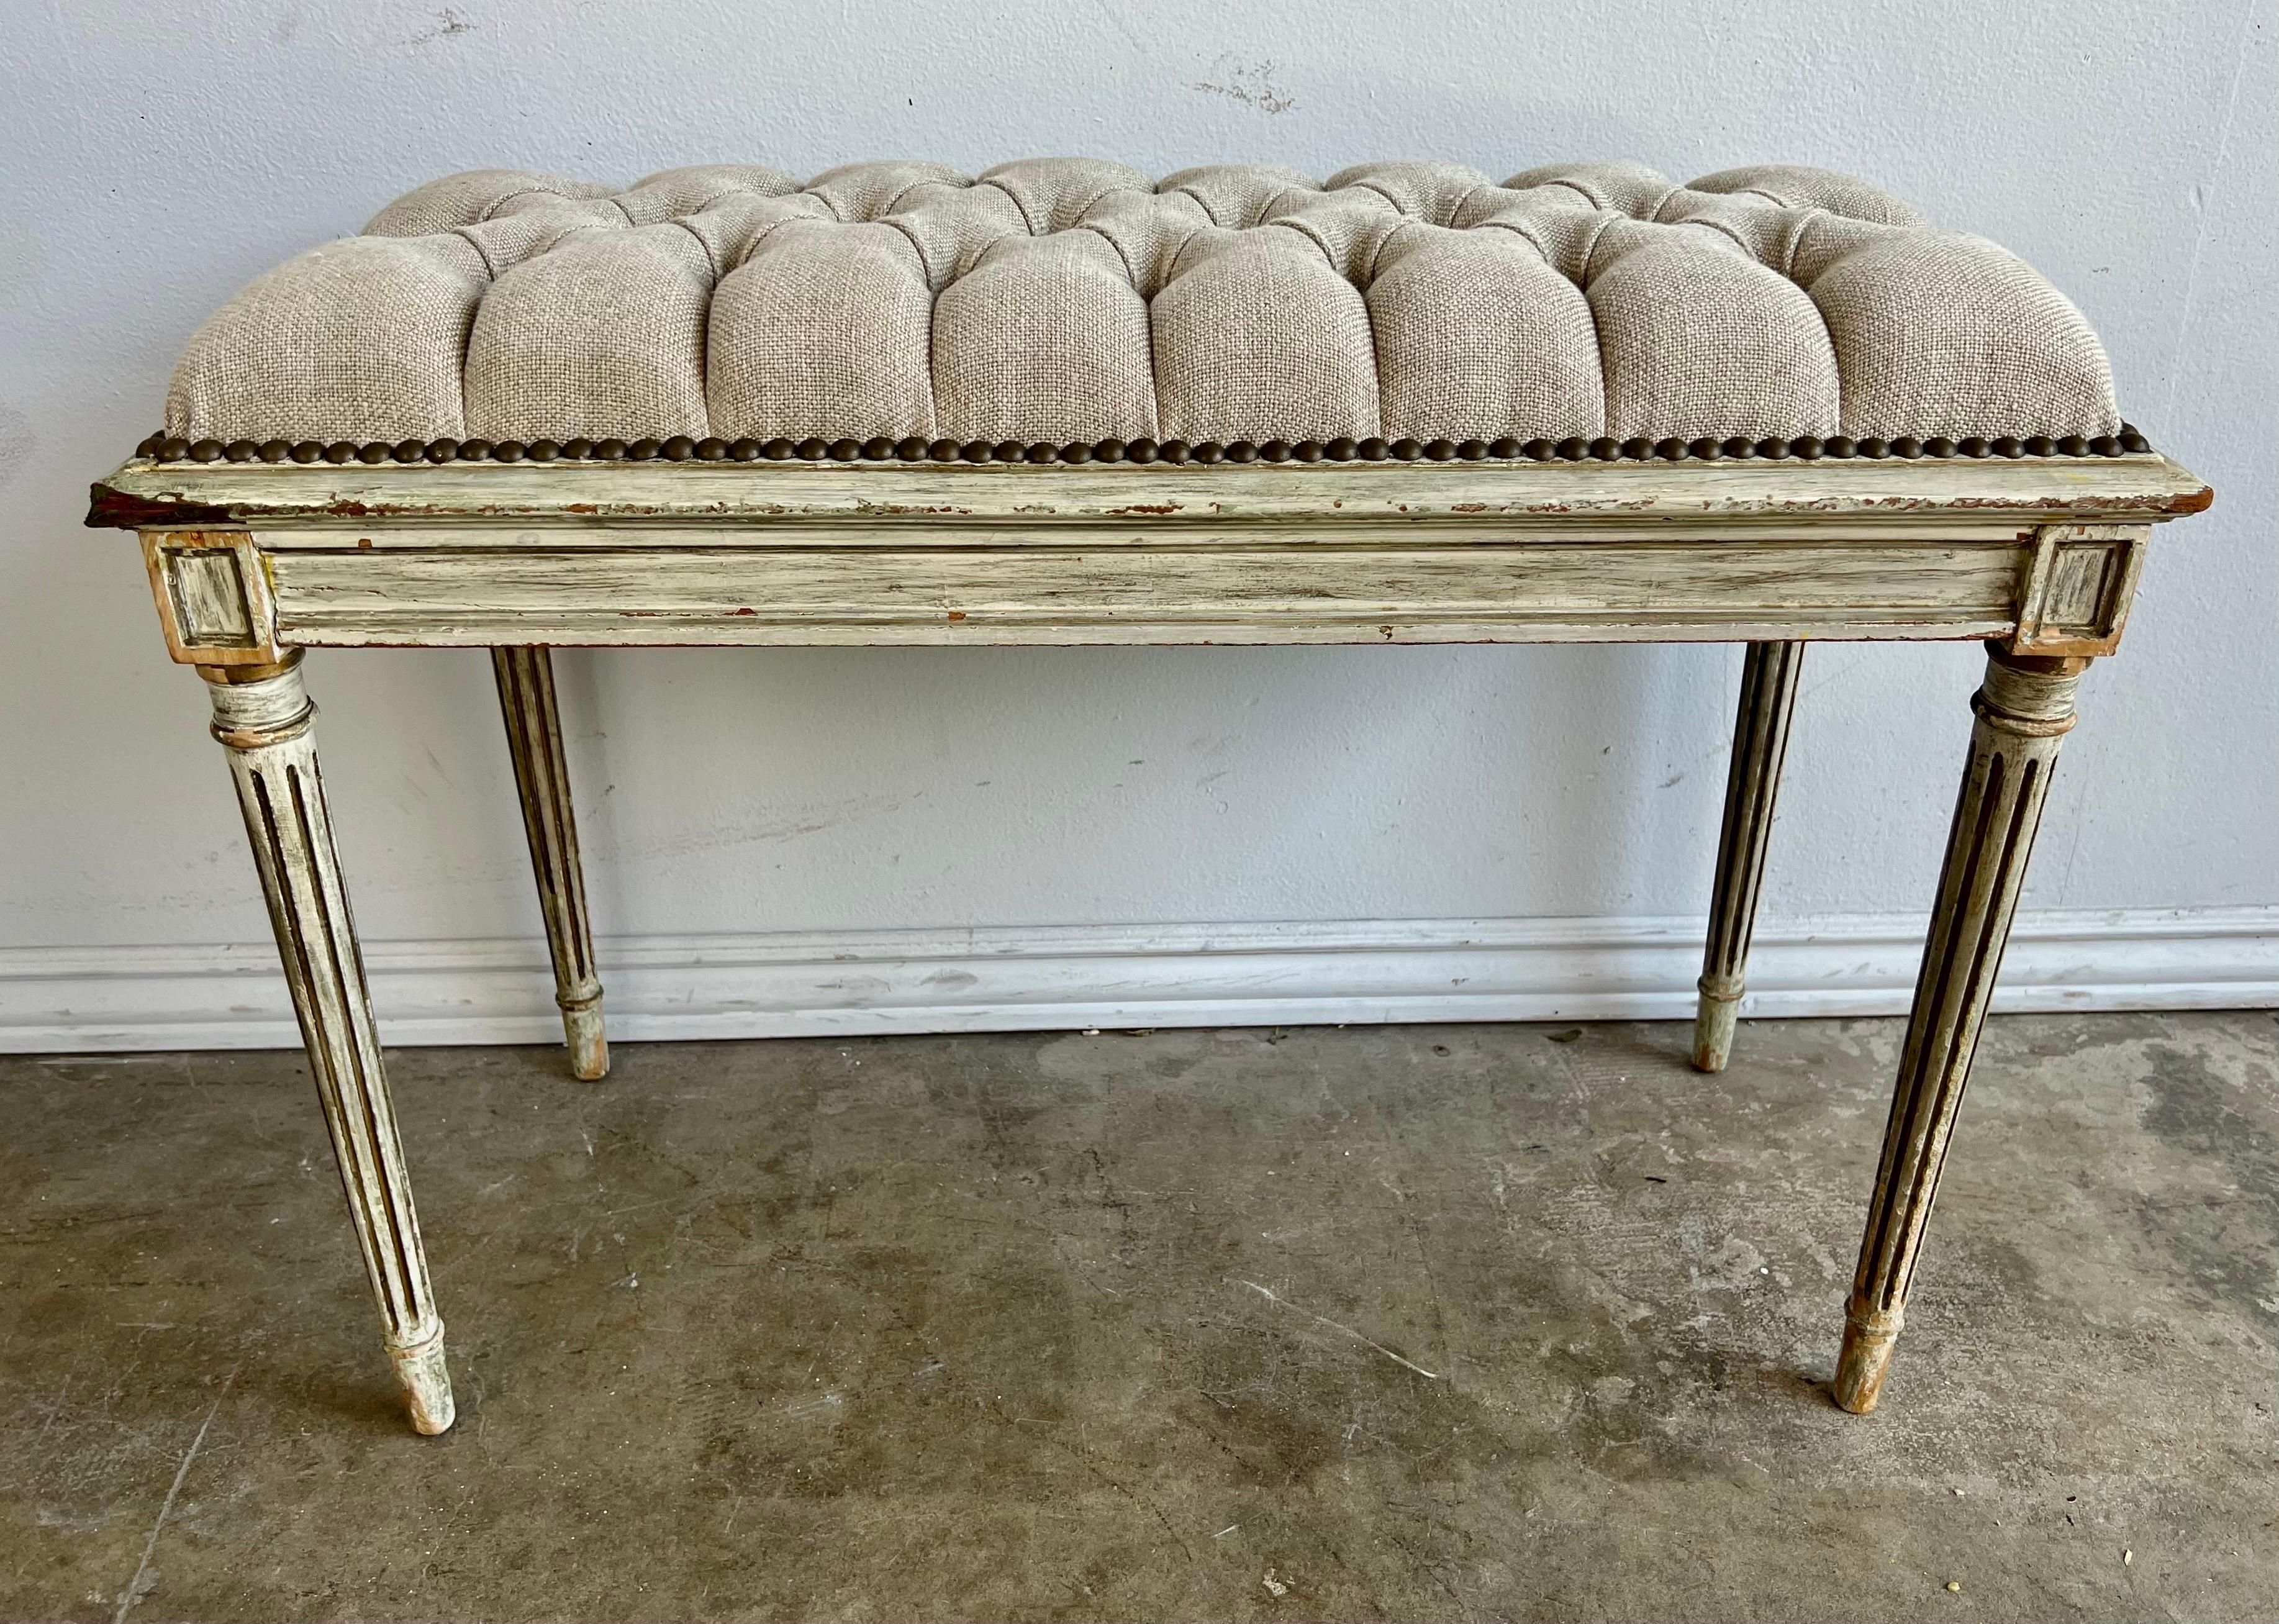 Italian Neoclassical style linen tufted upholstered bench. The bench stands on four straight fluted legs known as 